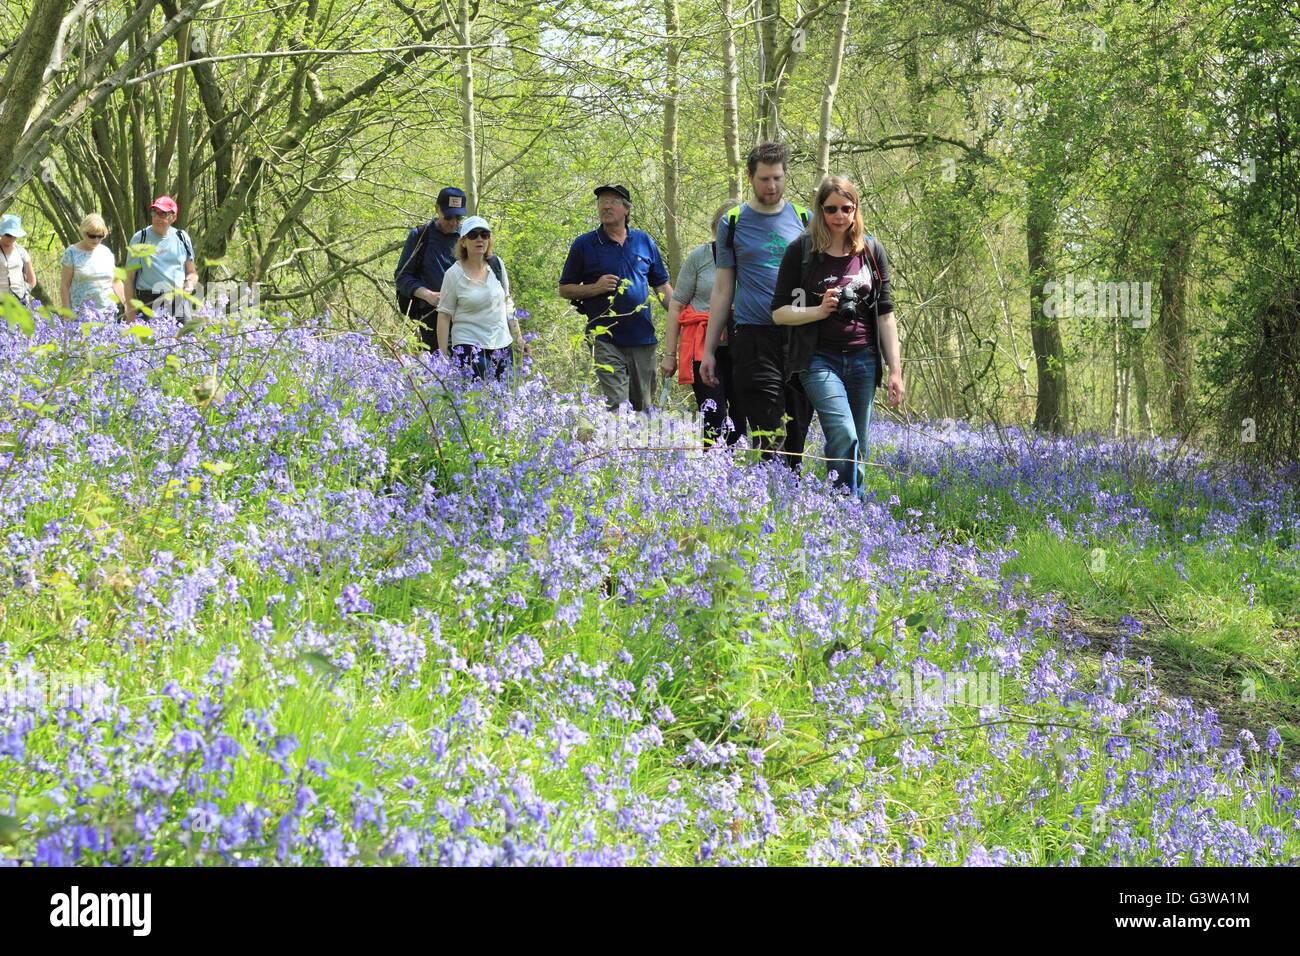 People on a guided walk through an English bluebell wood on the National Trust's Hardwick Estate  in Derbyshire, England, UK Stock Photo